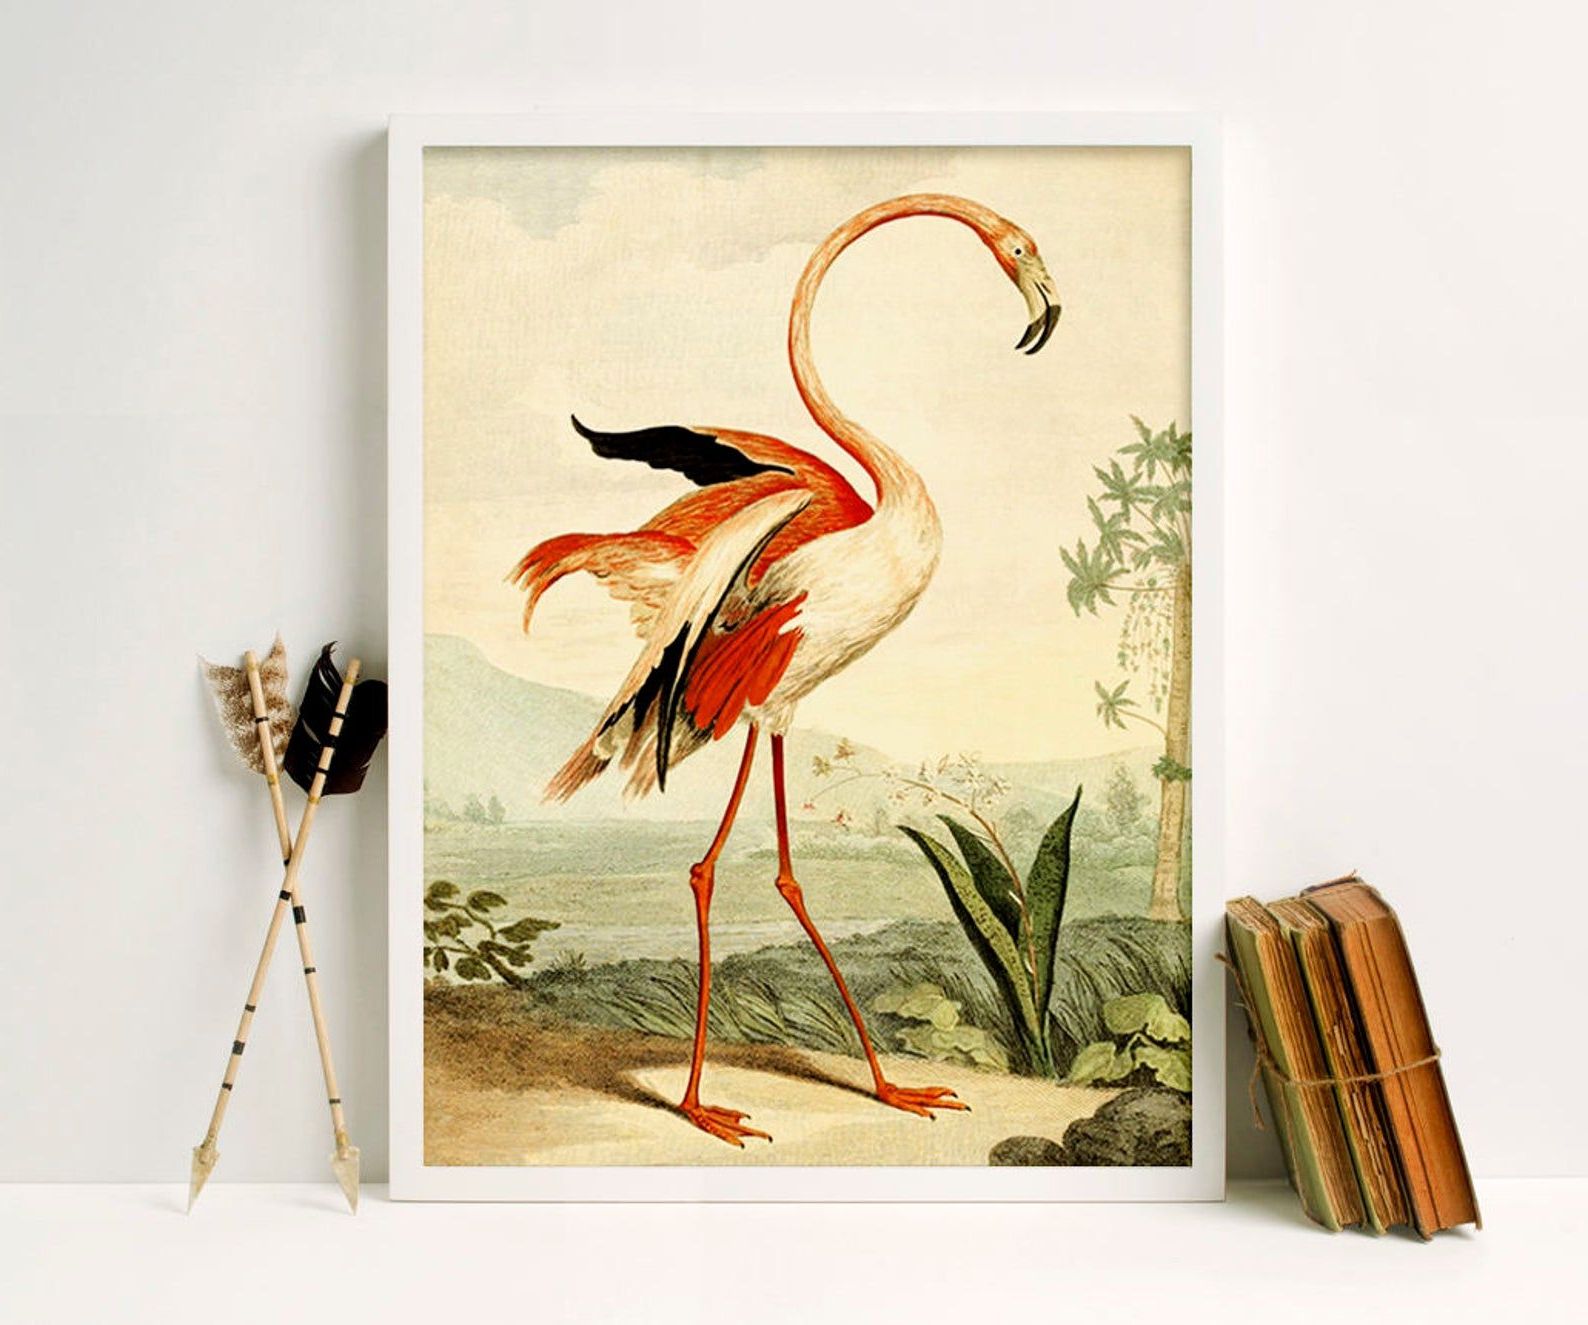 Well Known Tropical Framed Art Prints Pertaining To Framed Flamingo Print Tropical Décor Flamingo Wall Art (View 1 of 20)